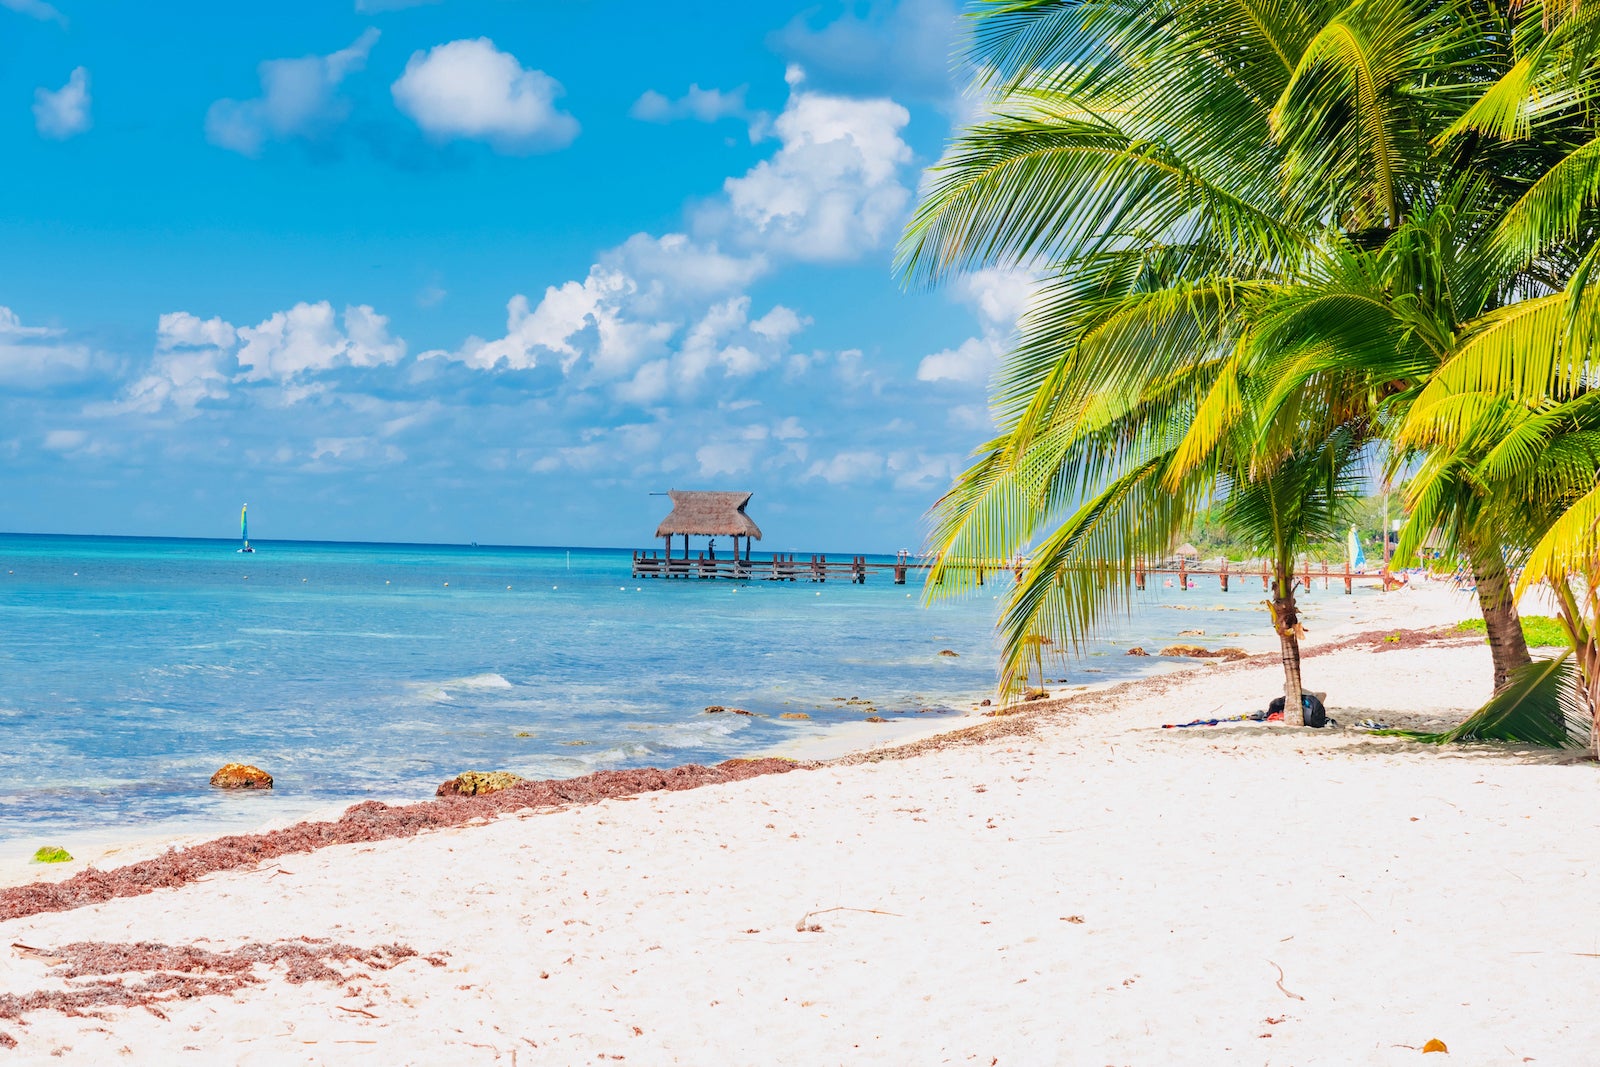 Mexico deal alert: Fly round-trip to Cancun, Cabo and Cozumel for less than $300